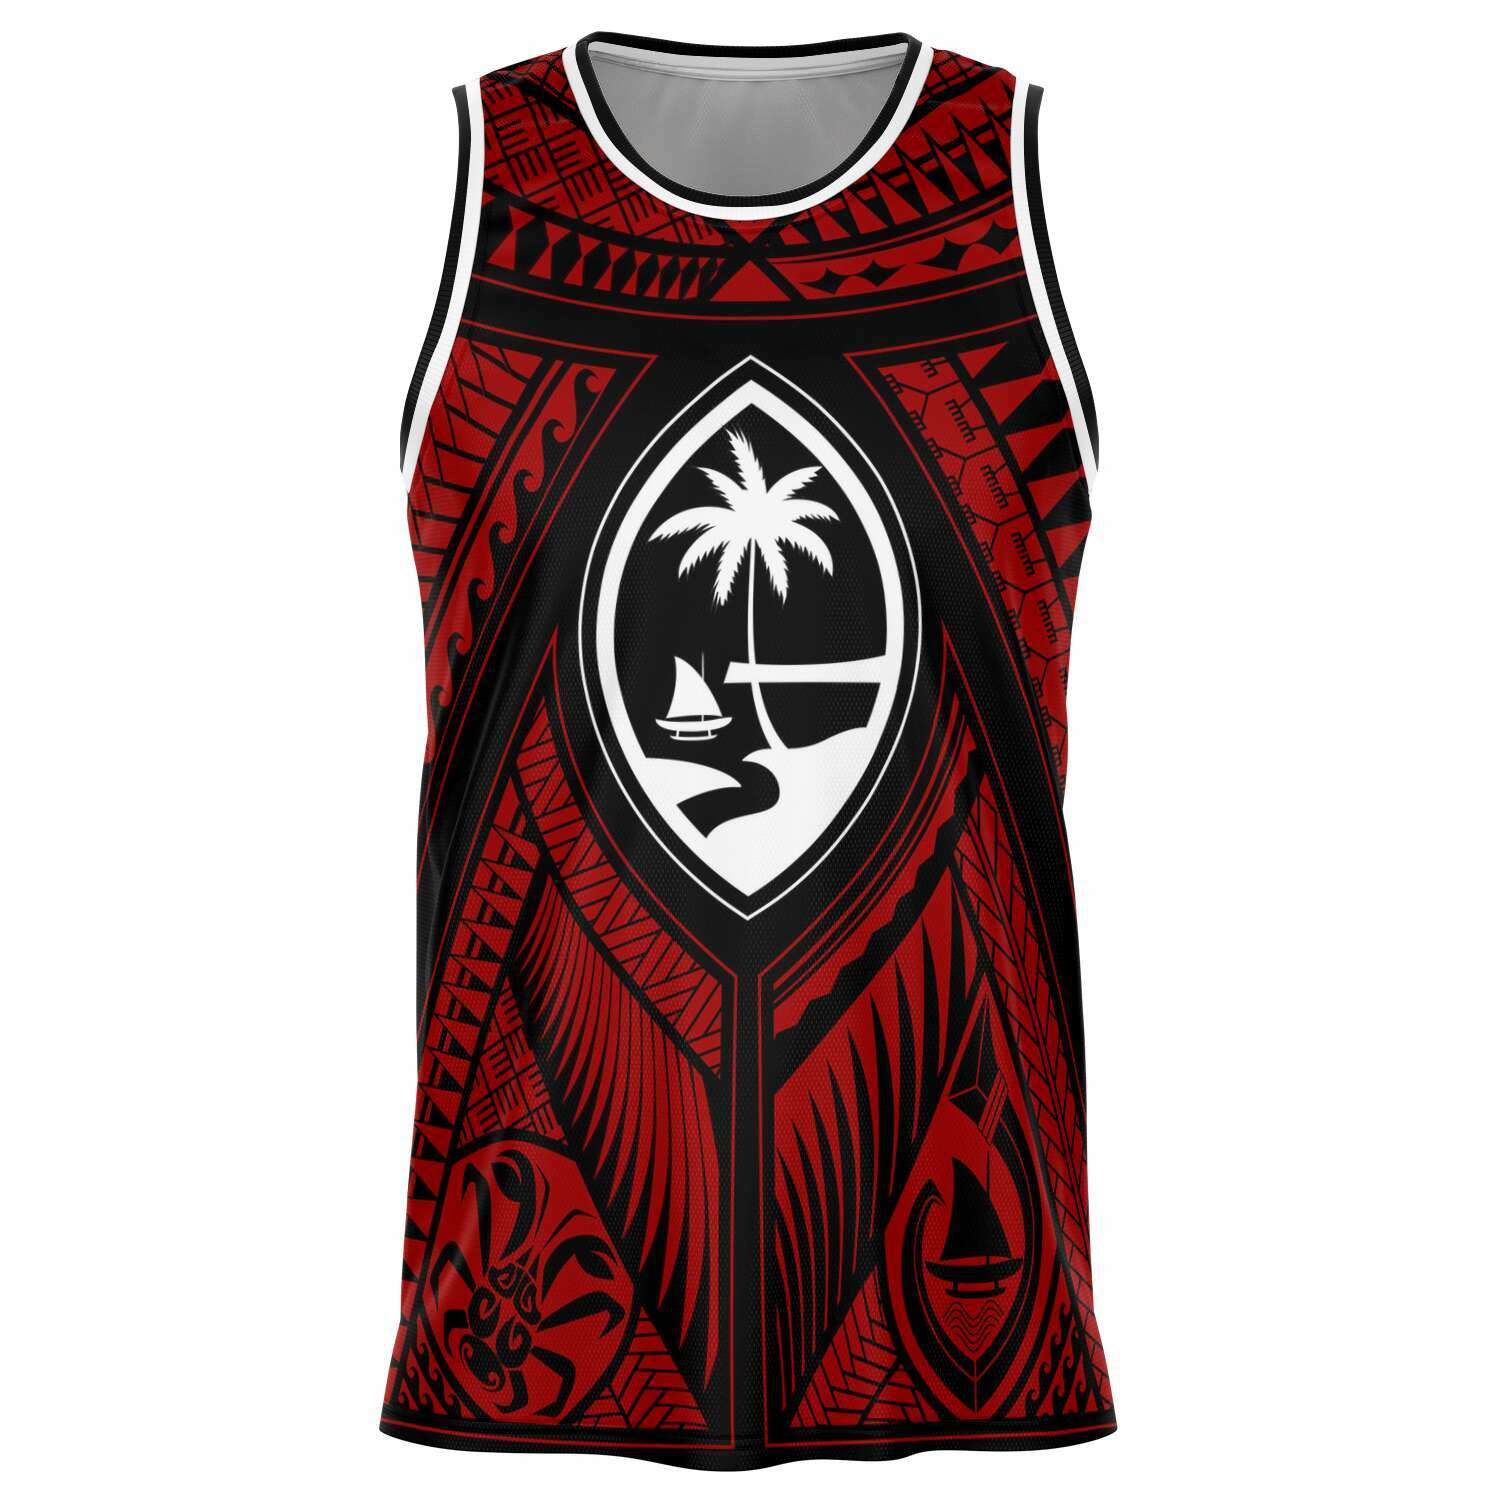 Red Basketball Jersey